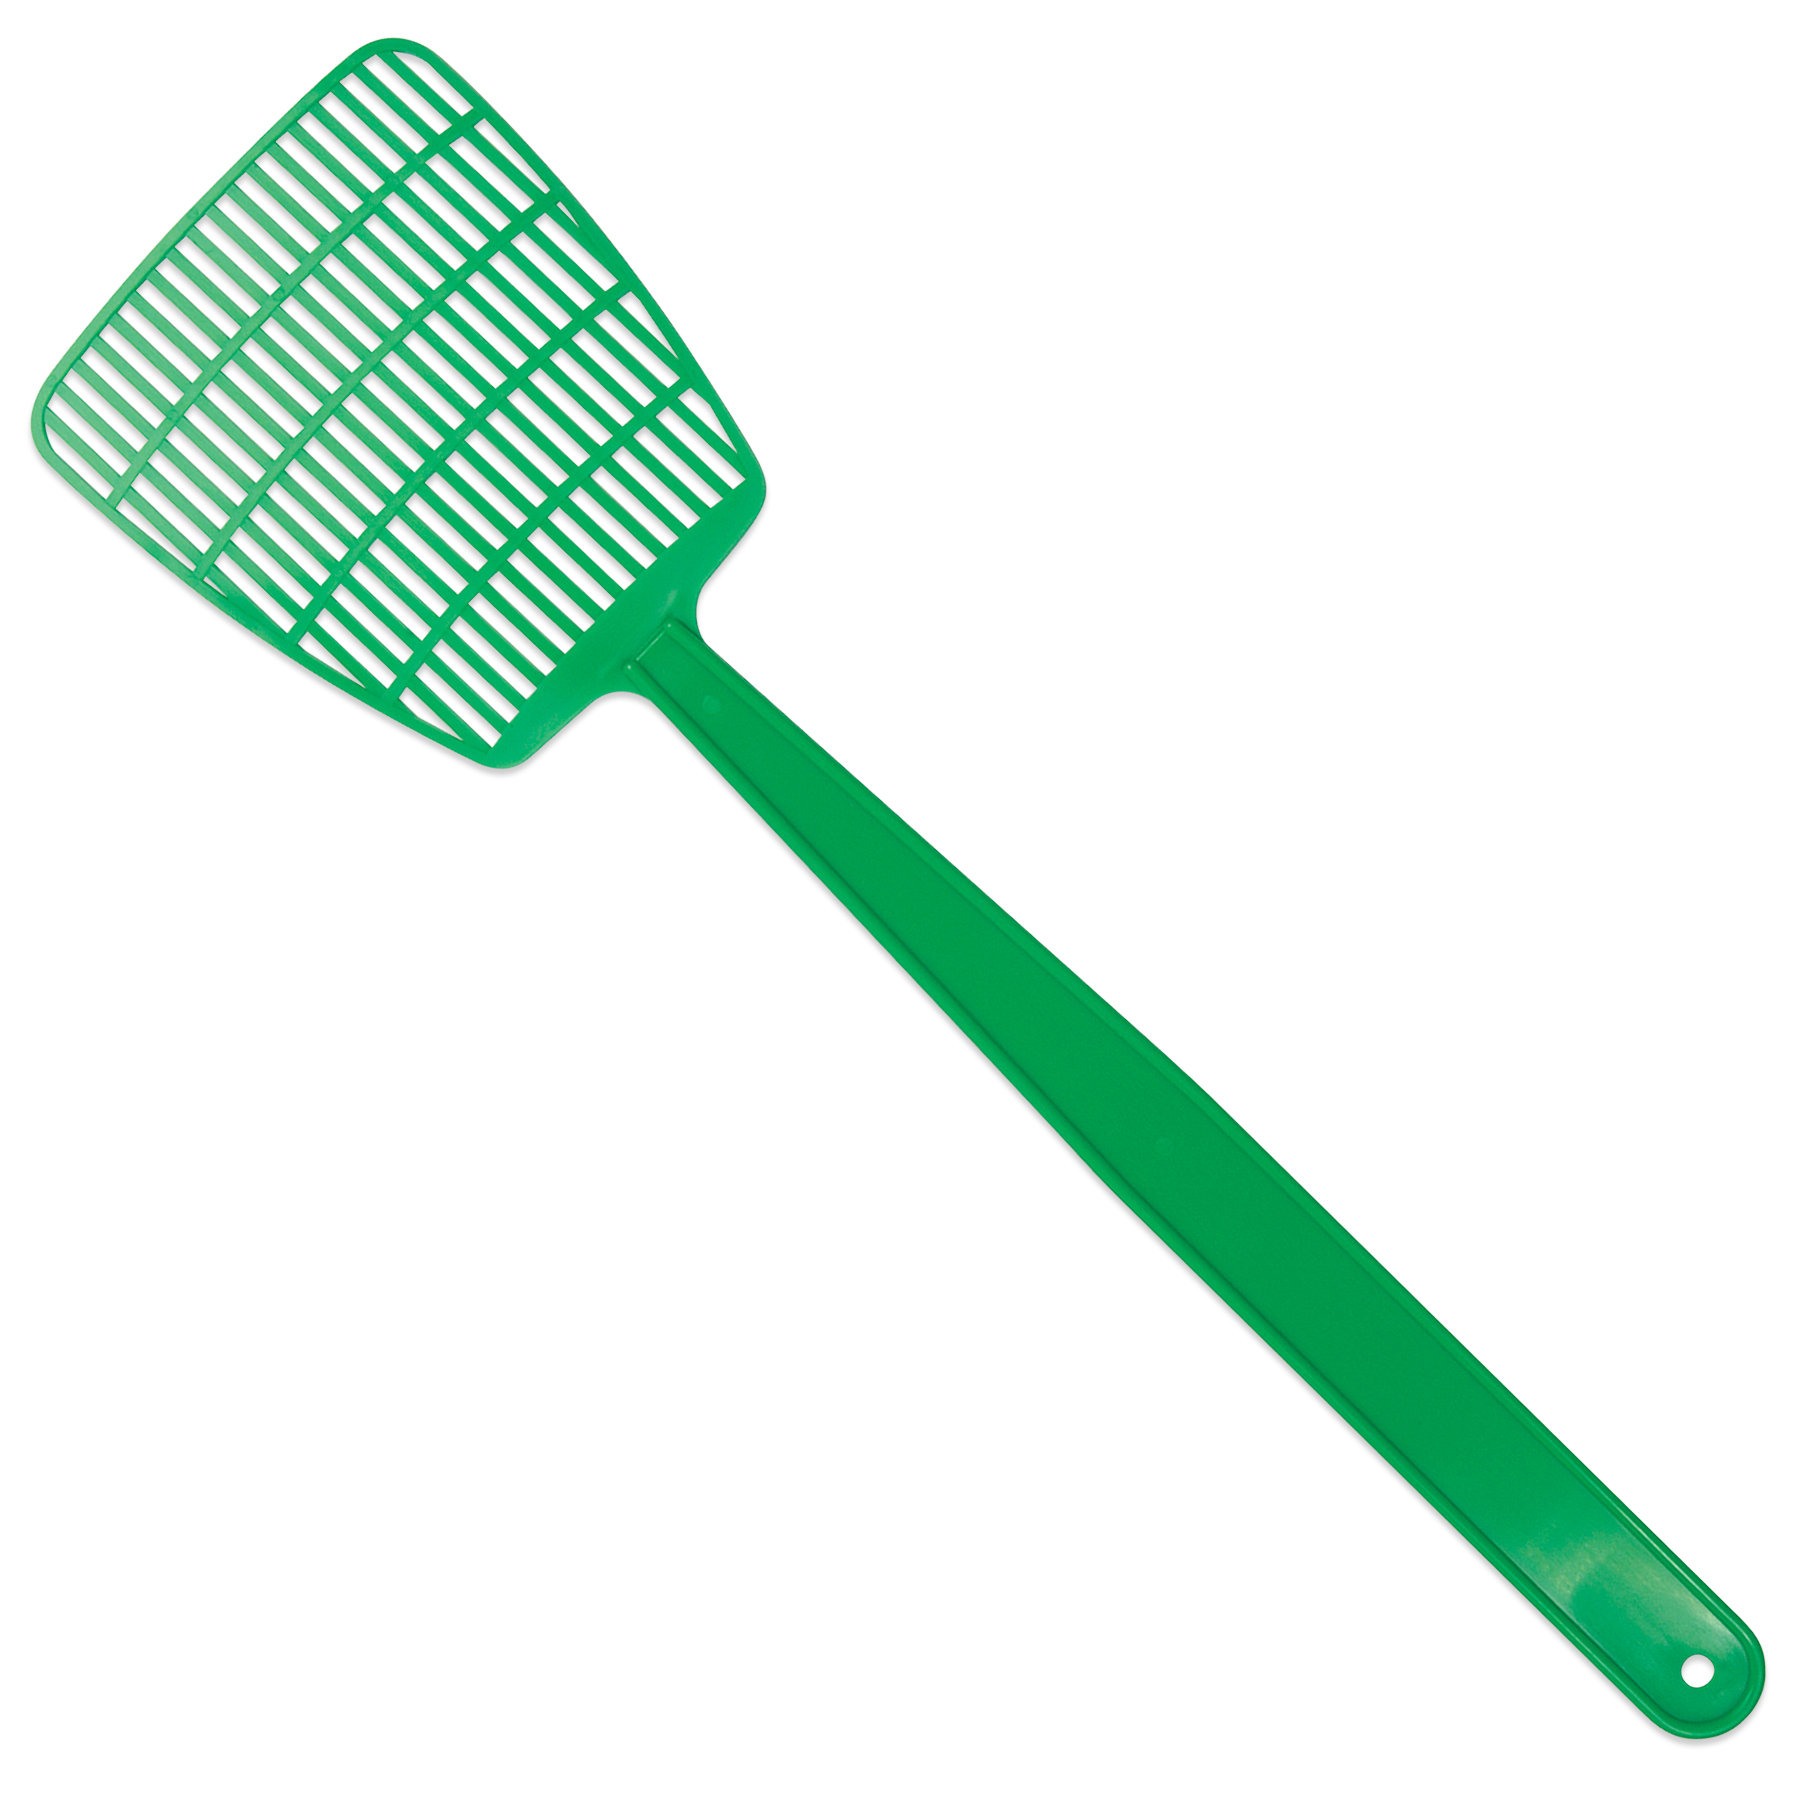 810-fly-swatter-stock-photos-pictures-royalty-free-images-clip-art-library